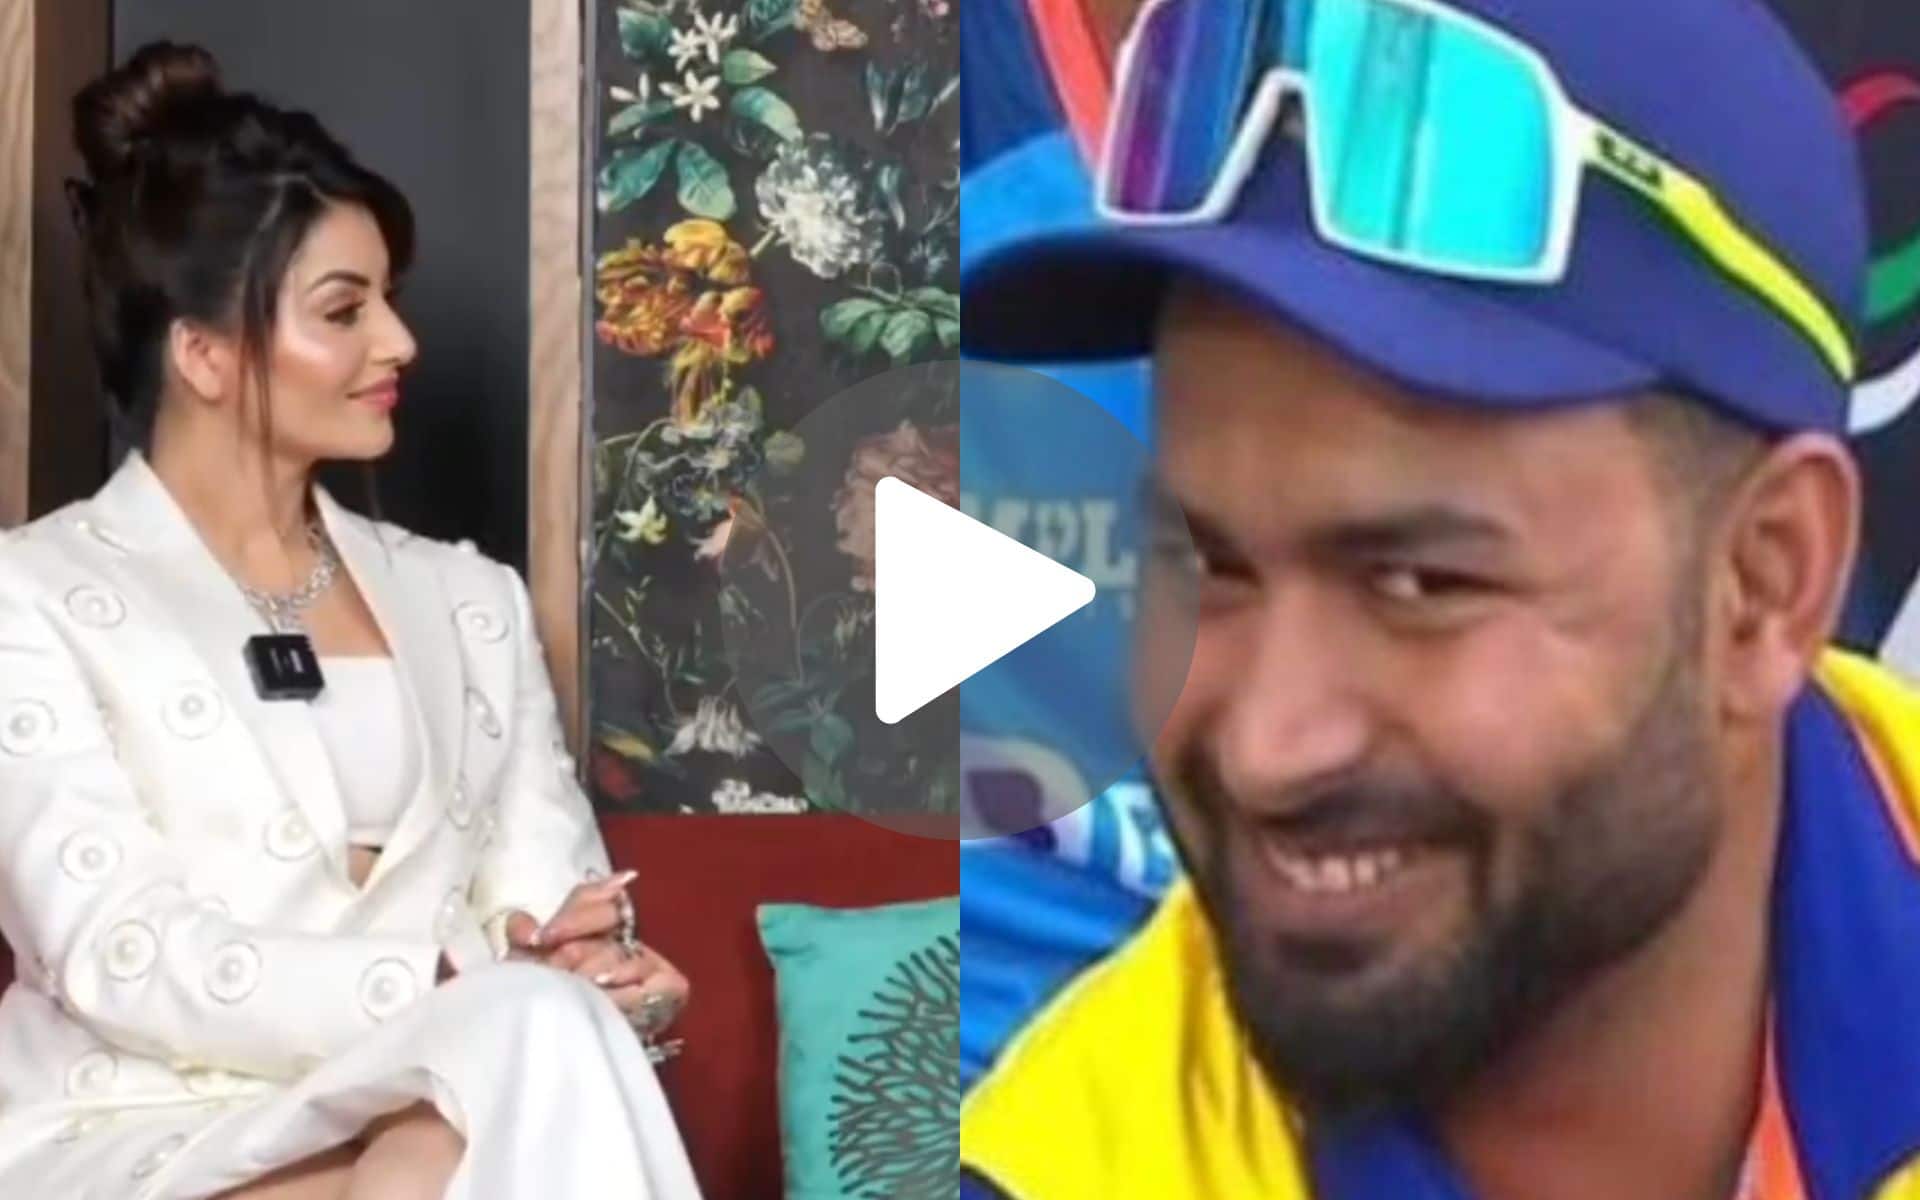 [Watch] What Did Urvashi Rautela Say About Marrying Rishabh Pant?